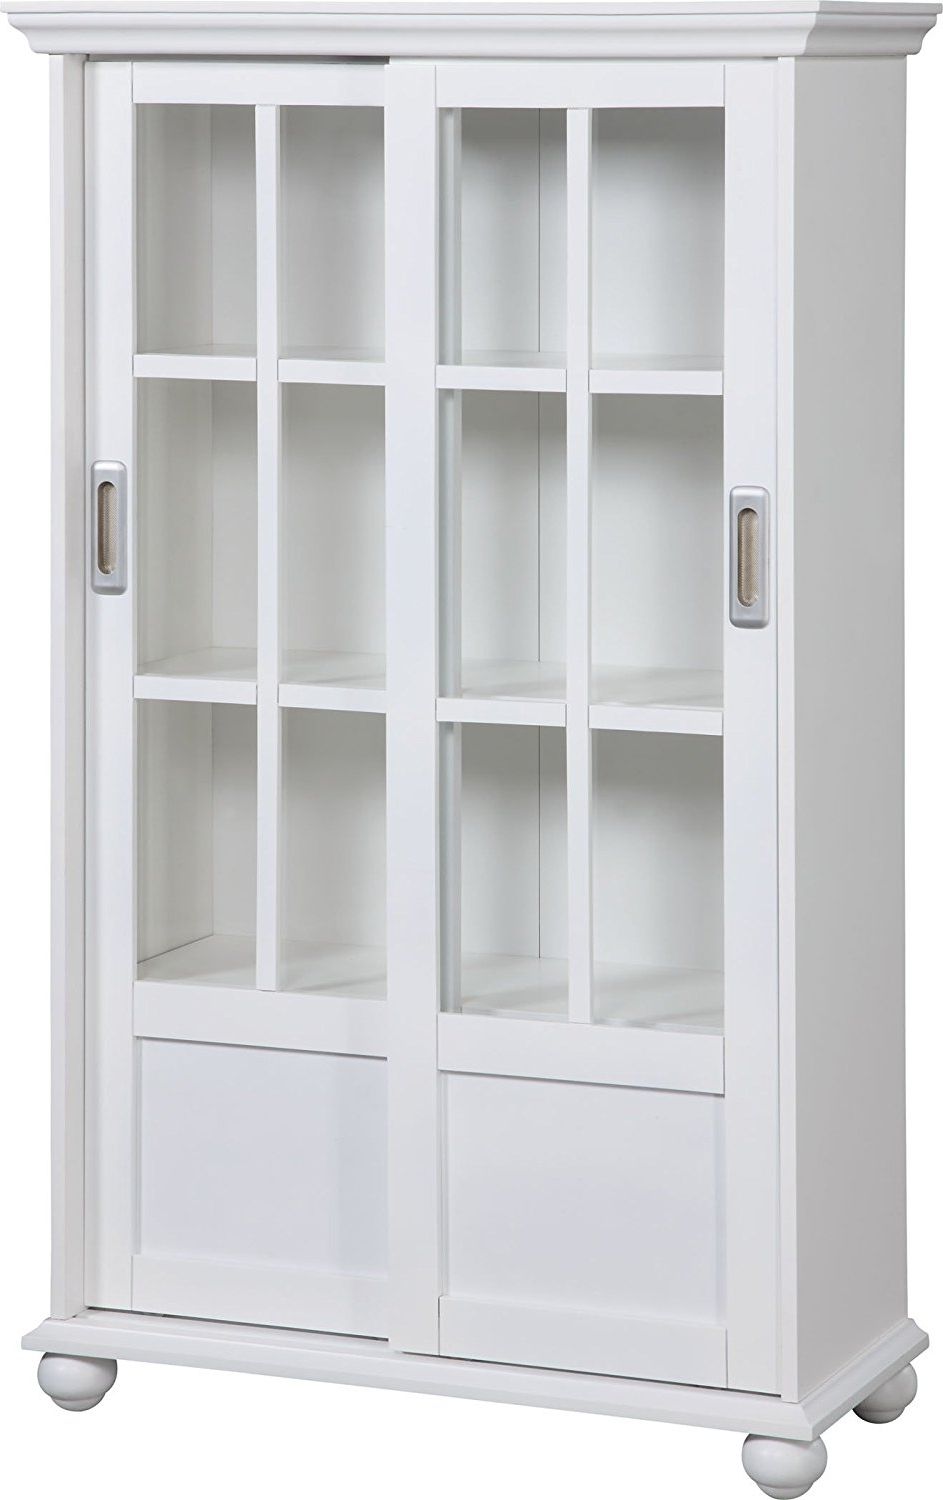 Bookcases With Drawers Regarding Most Recent Amazon: Altra 9448096 Bookcase With Sliding Glass Doors, White (View 11 of 15)